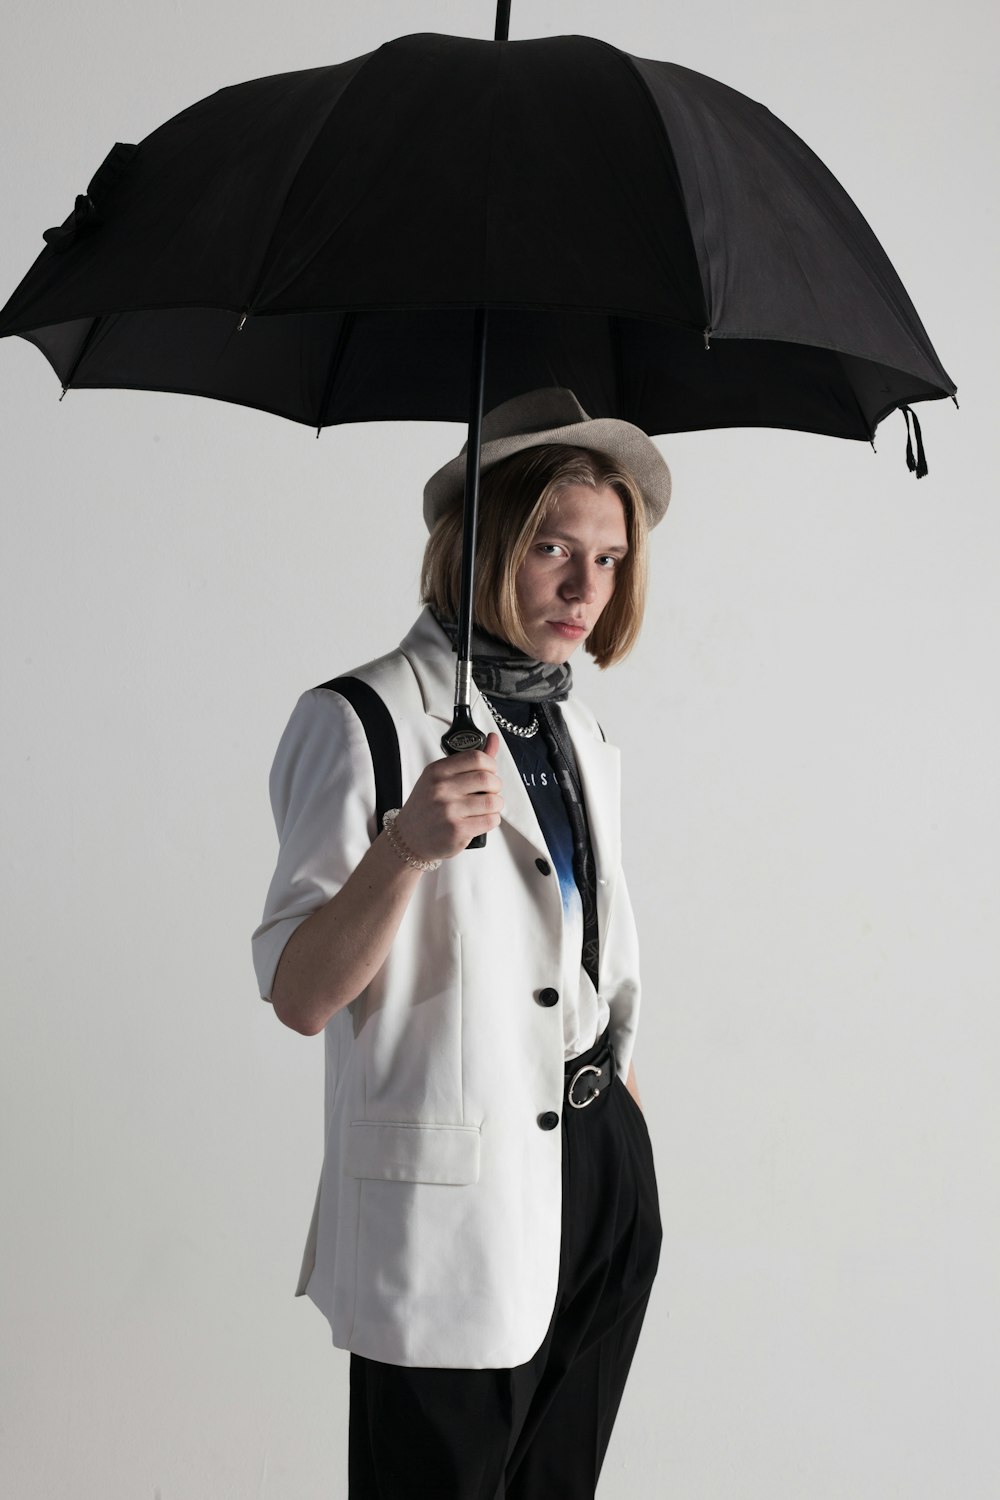 a woman in a suit and hat holding an umbrella